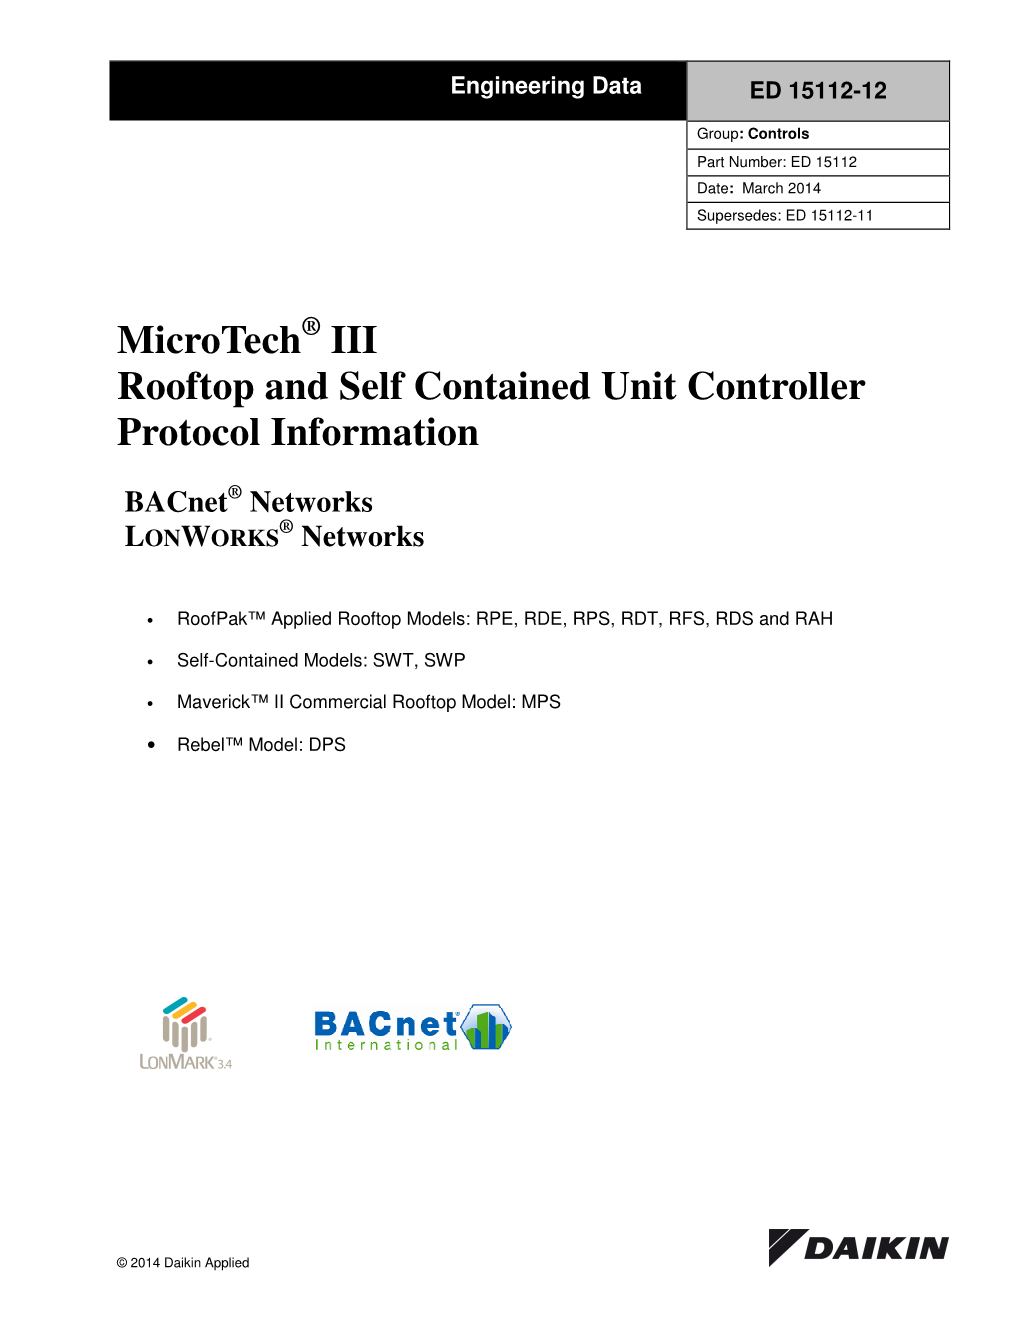 Microtech III Rooftop and Self Contained Unit Controller Protocol